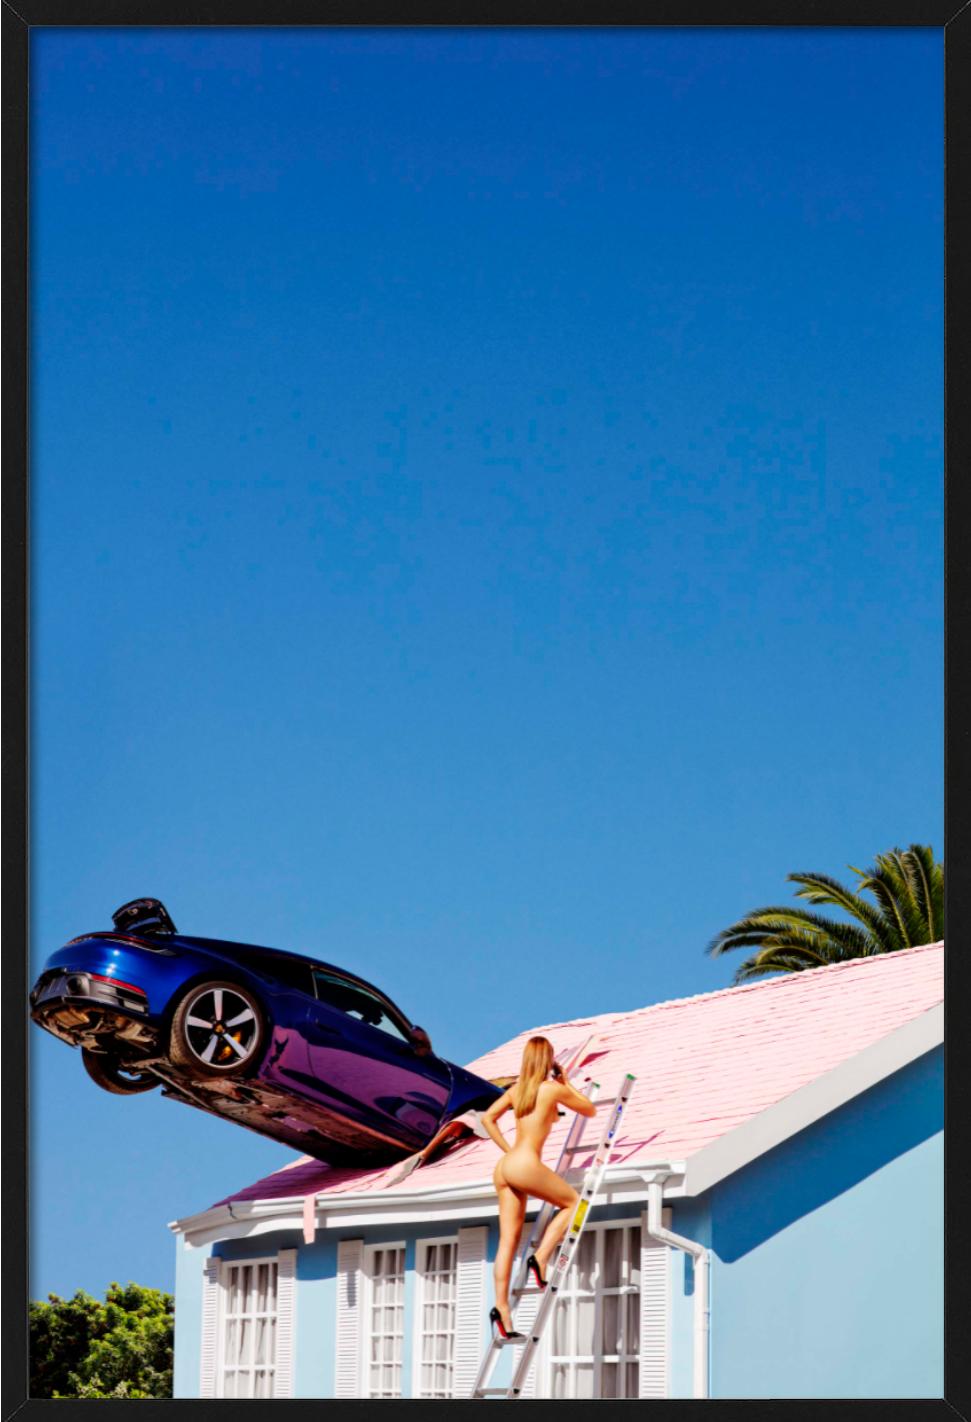 Rooftop Parking - Nude on a Rooftop with Purple Car, Fine Art Photography, 2012 - Blue Nude Photograph by Tony Kelly